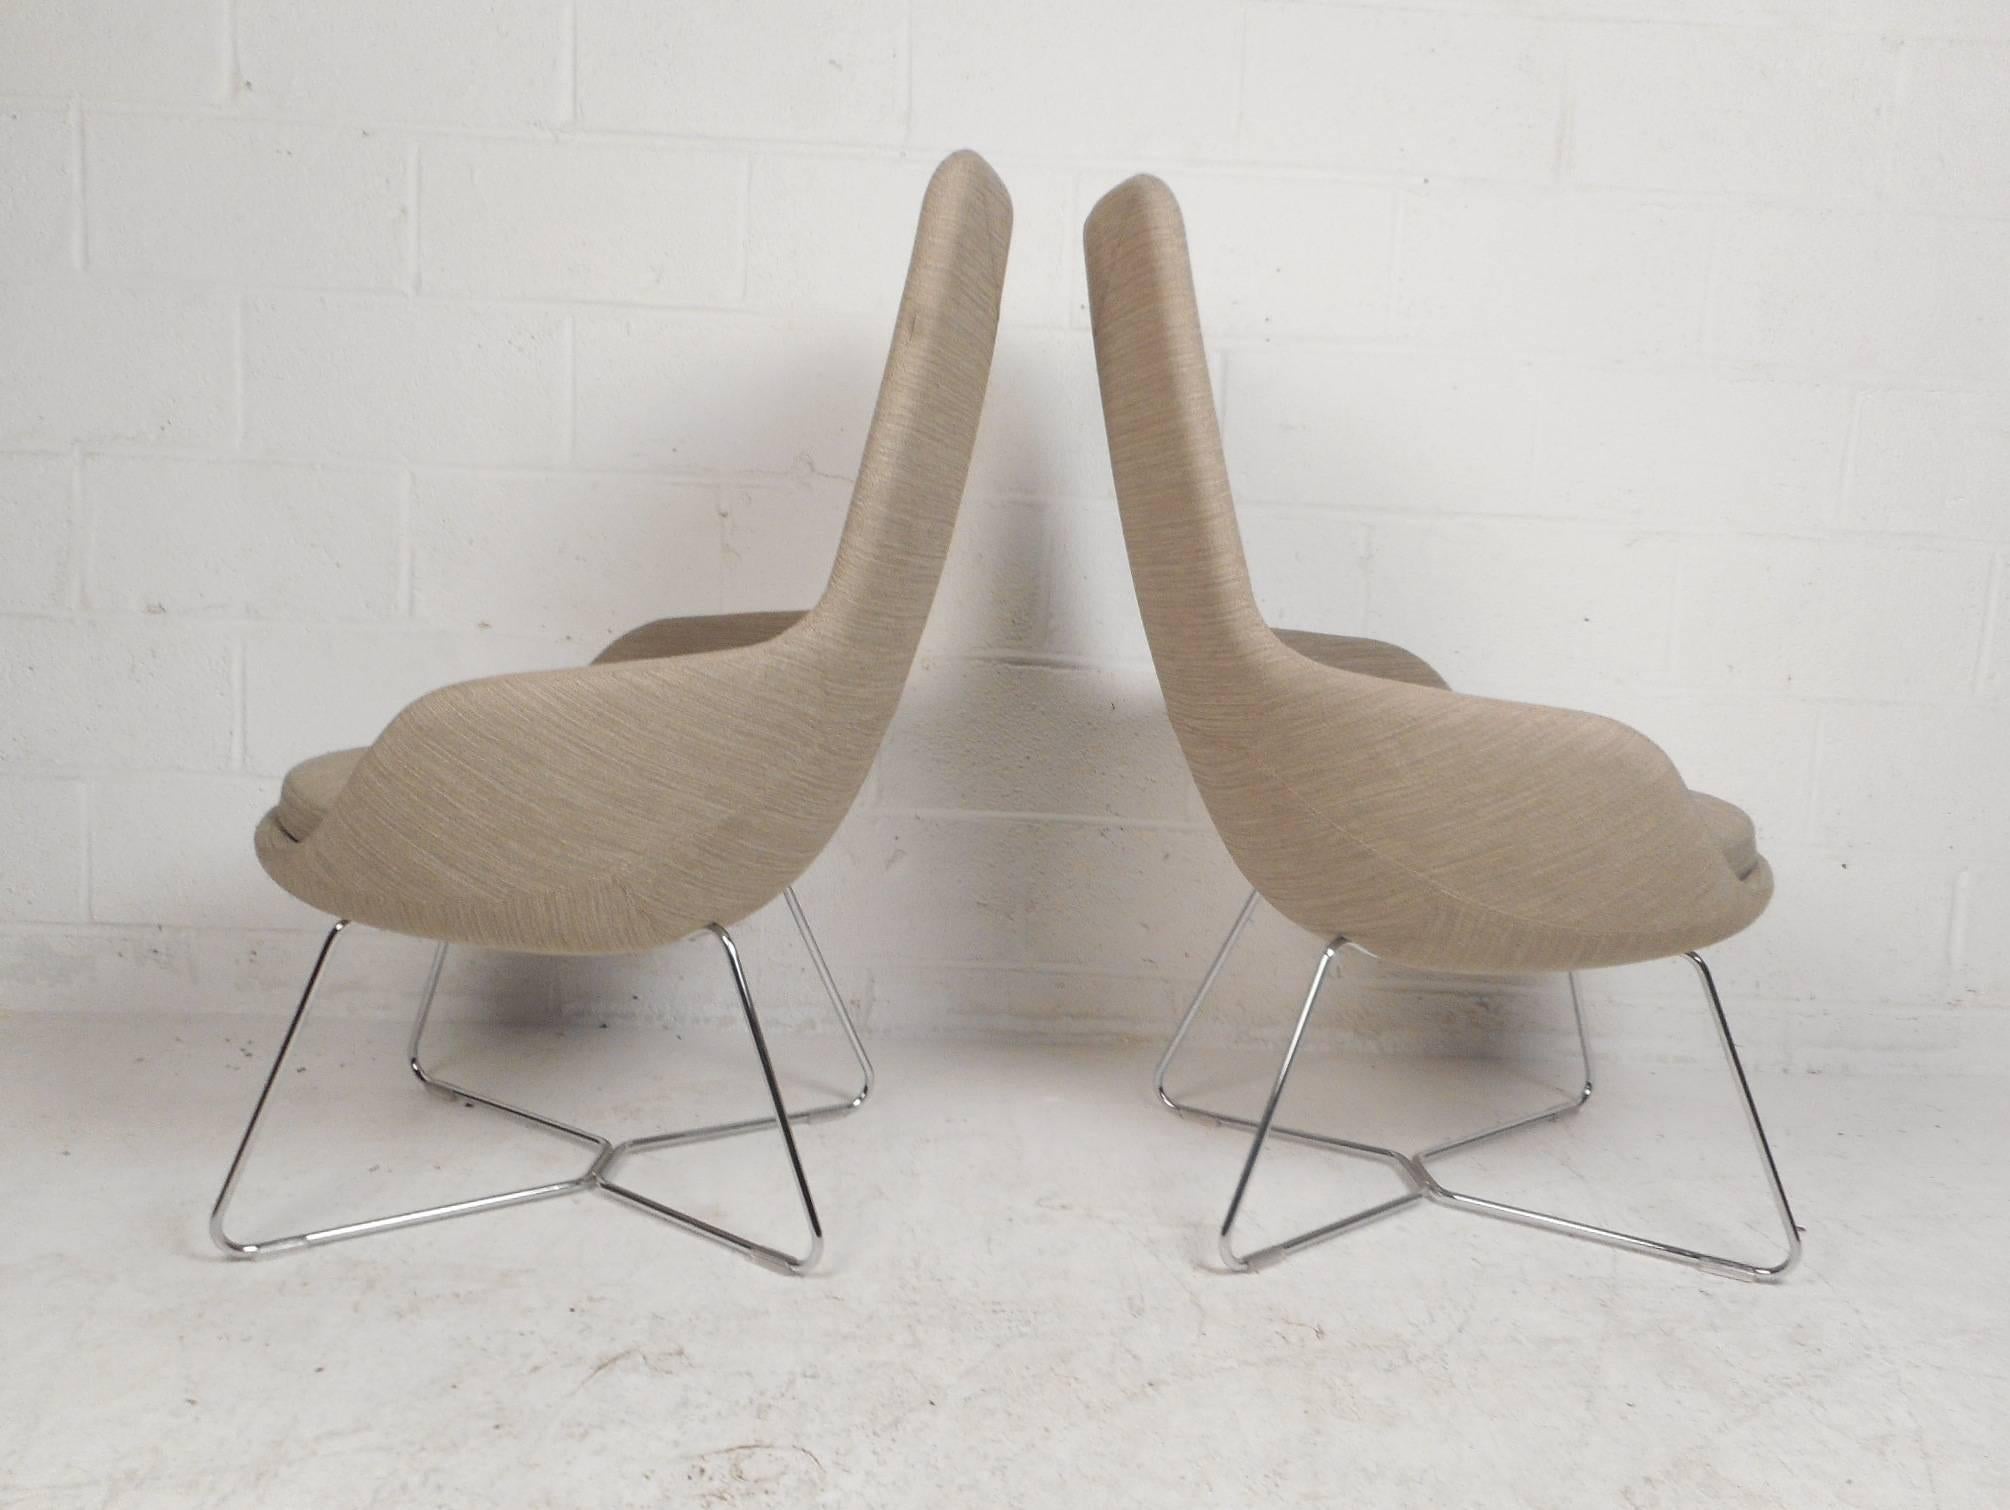 Canadian Pair of Mid-Century Style High back Lounge Chairs For Sale